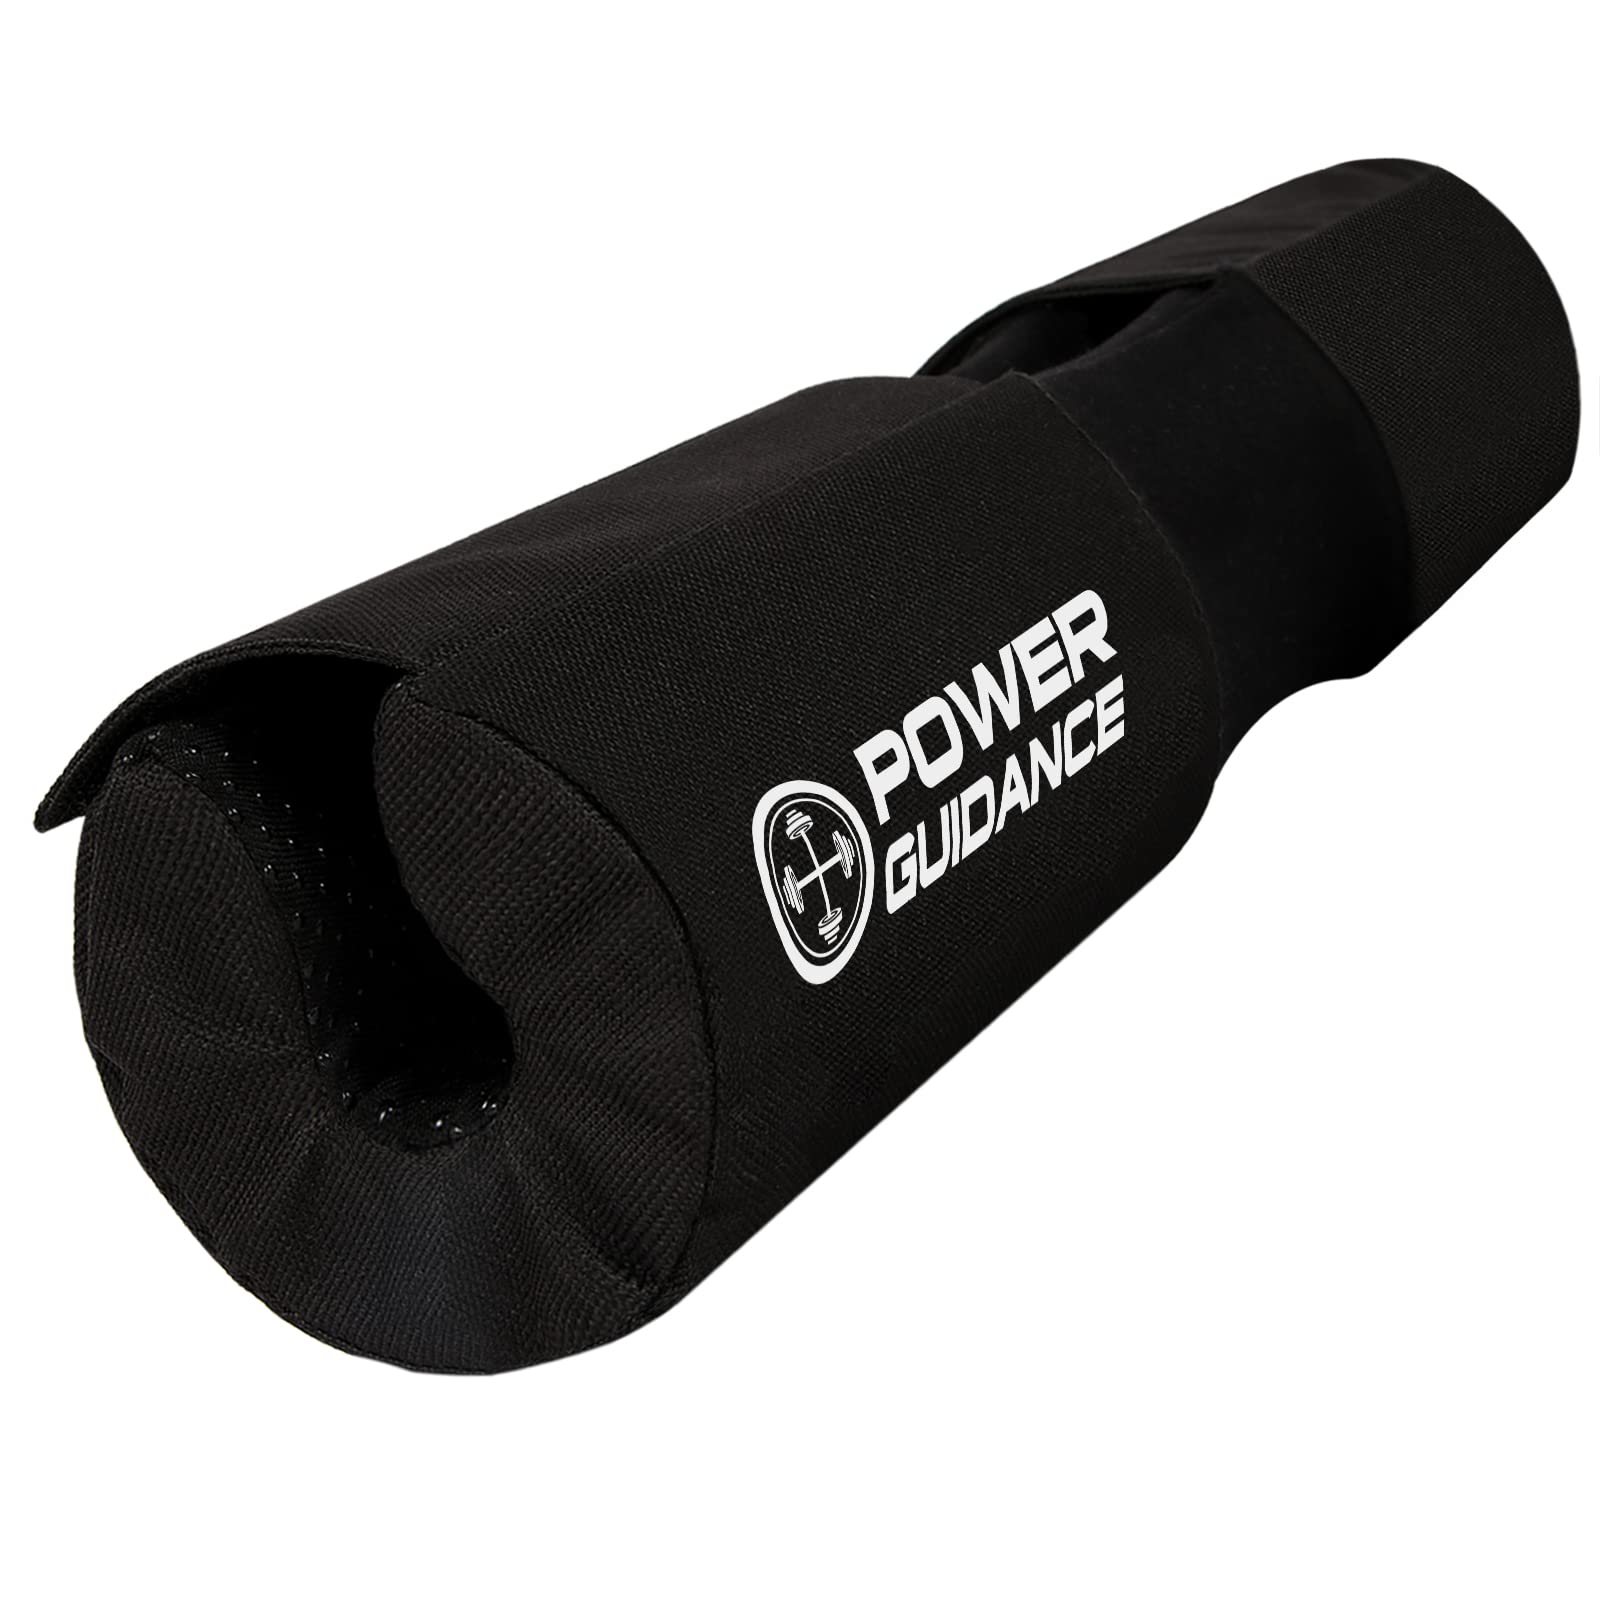 Barbell Pad Squat Pad Shoulder Support for Olympic & Standard Bars